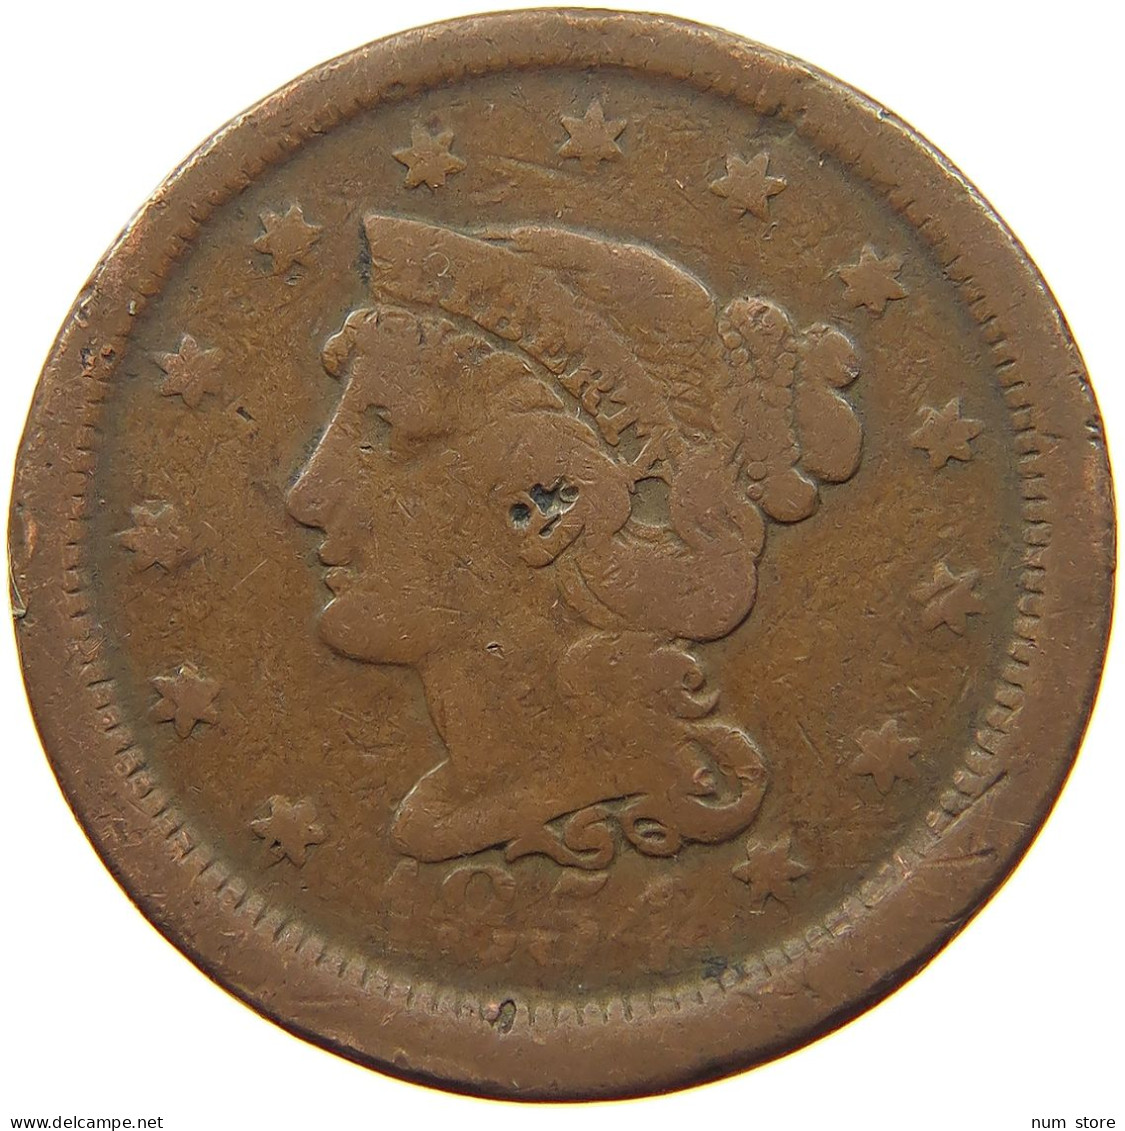 UNITED STATES OF AMERICA LARGE CENT 1854 BRAIDED HAIR #t145 0439 - 1816-1839: Coronet Head